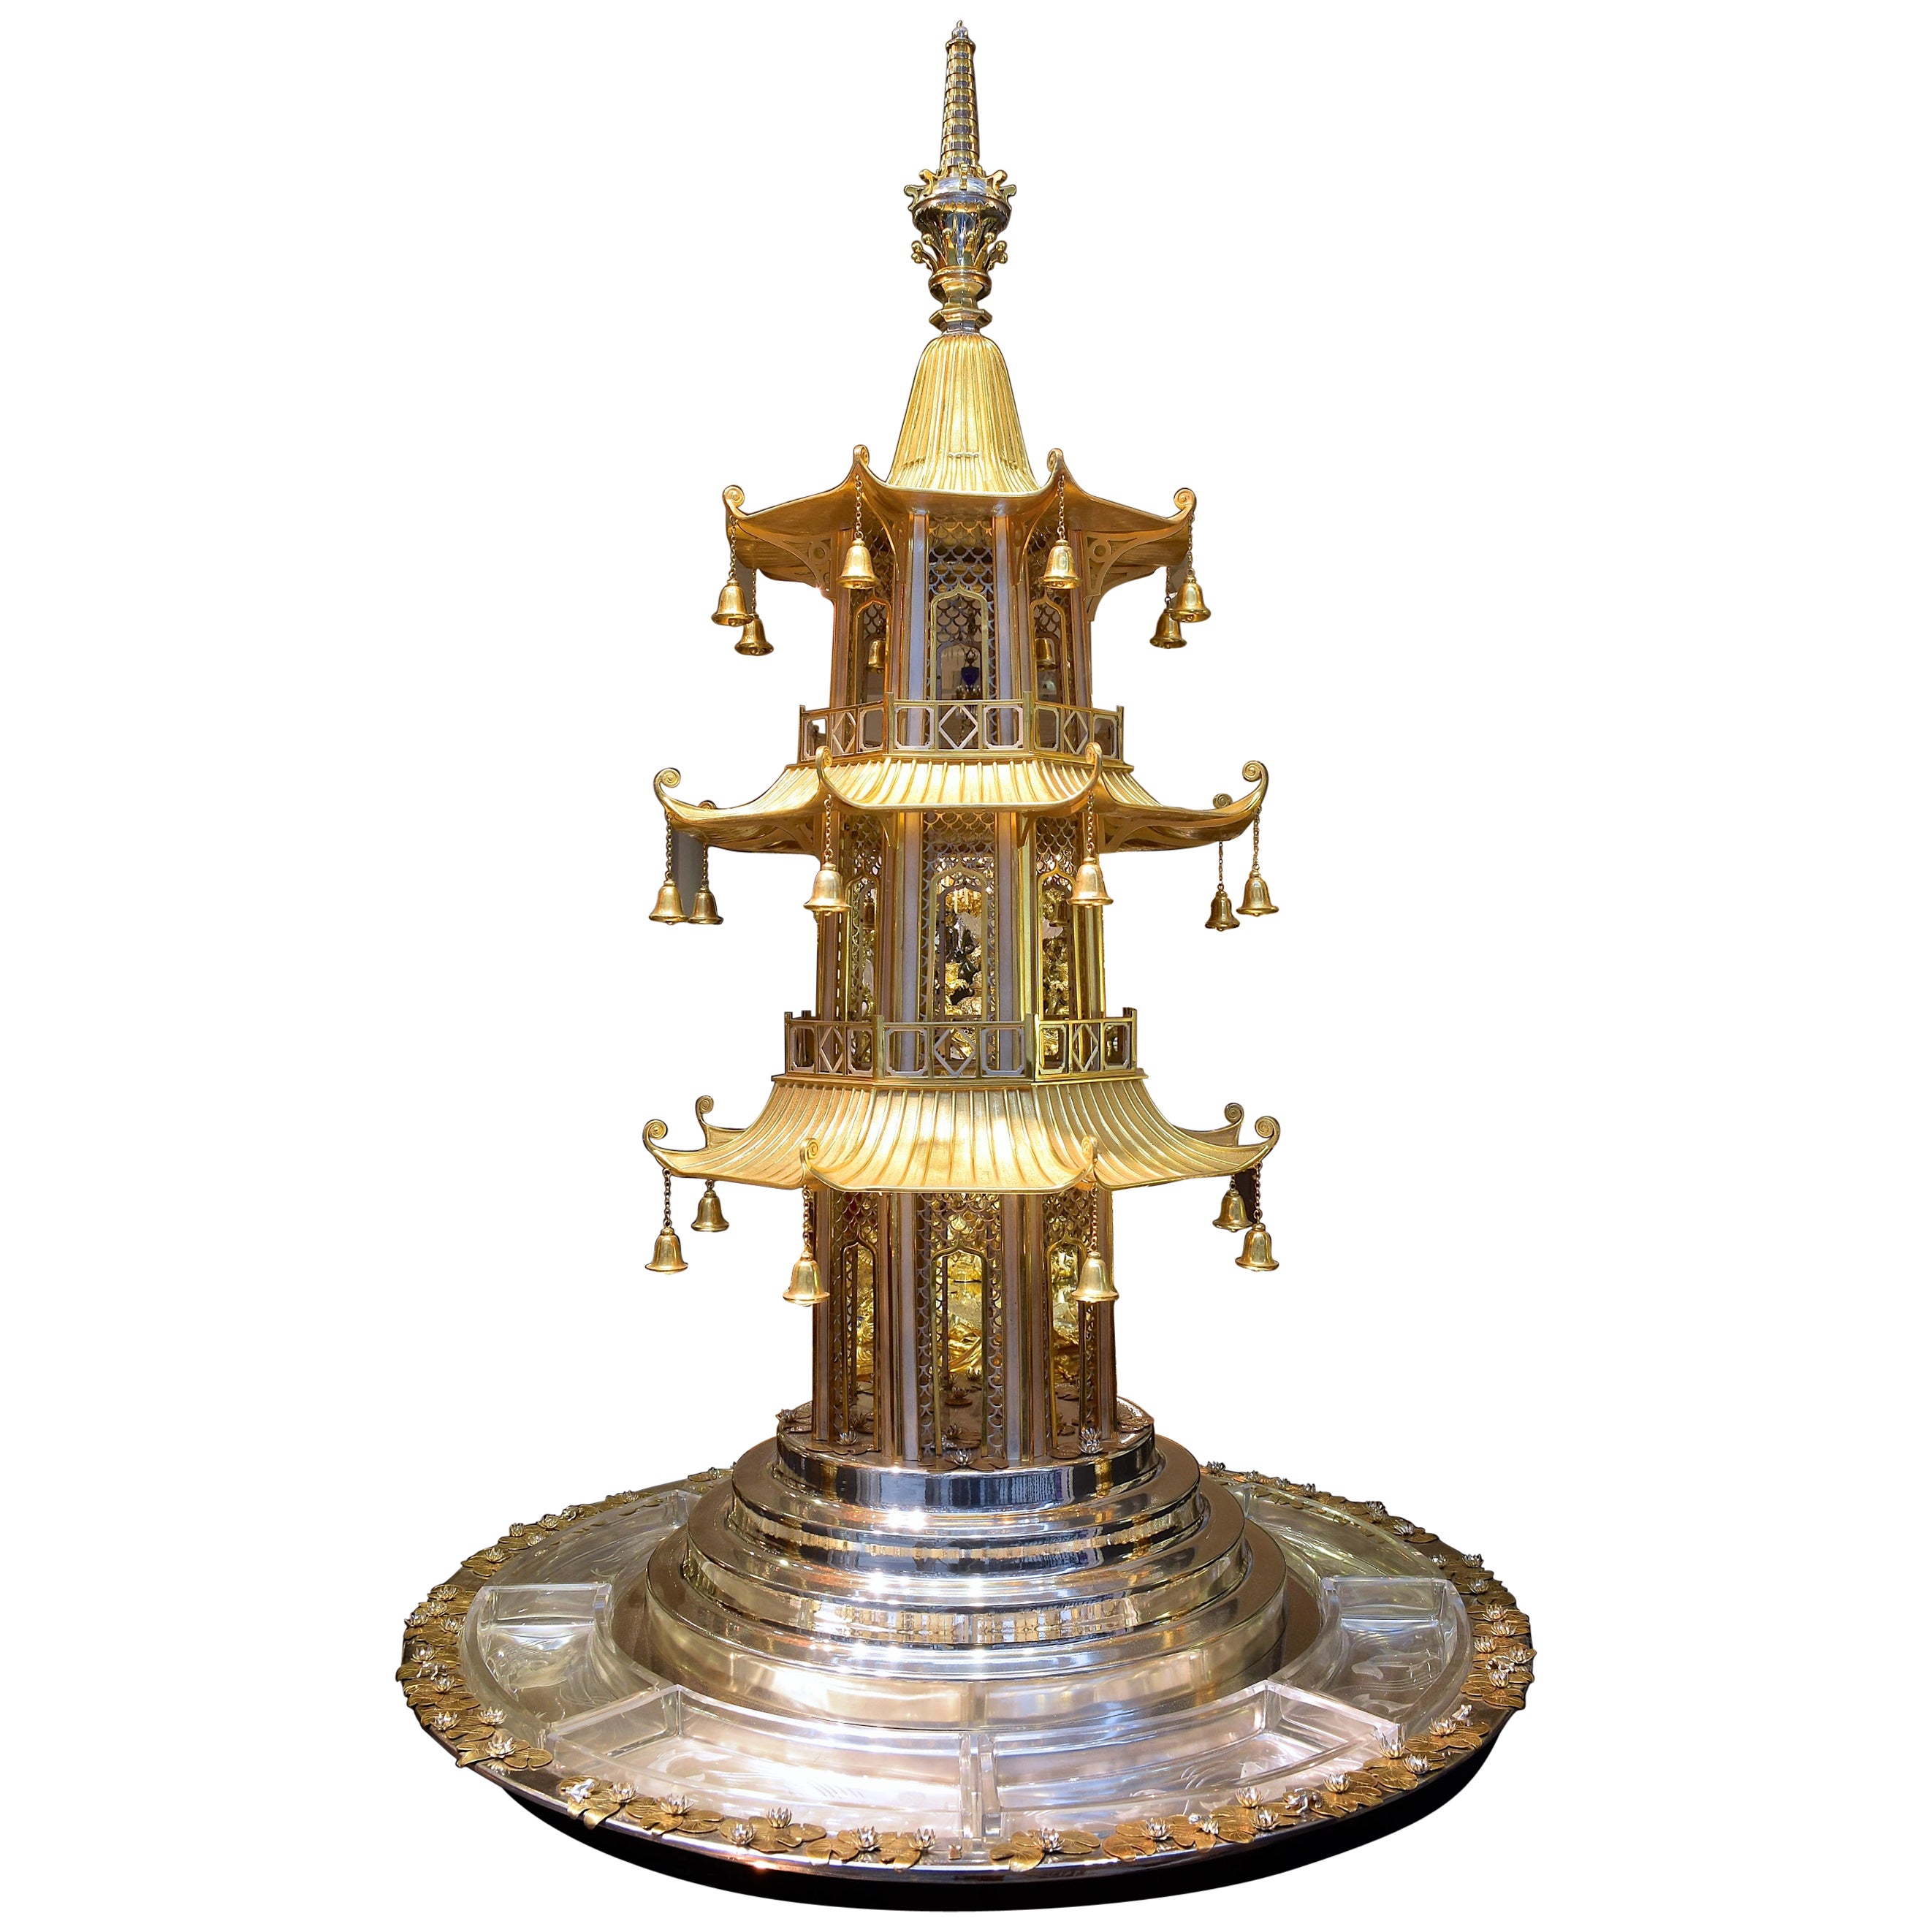 A Monumental part-gilded sterling silver and engraved glass rotating centrepiece